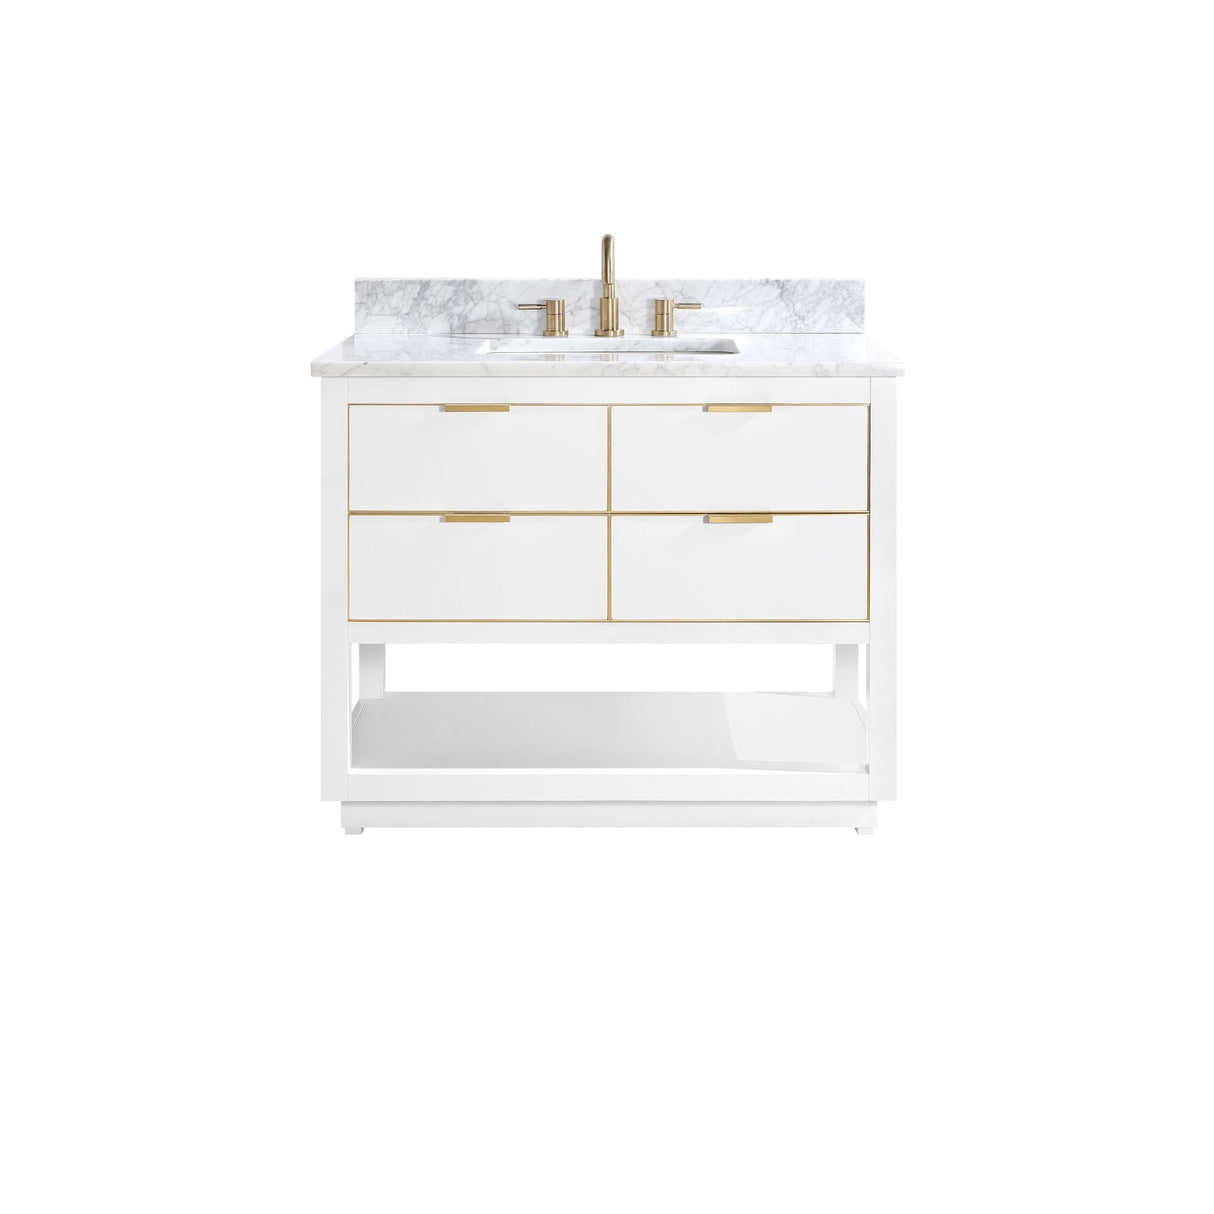 Avanity Allie 43 in. Vanity Combo in White with Gold Trim and Carrara White Marble Top 